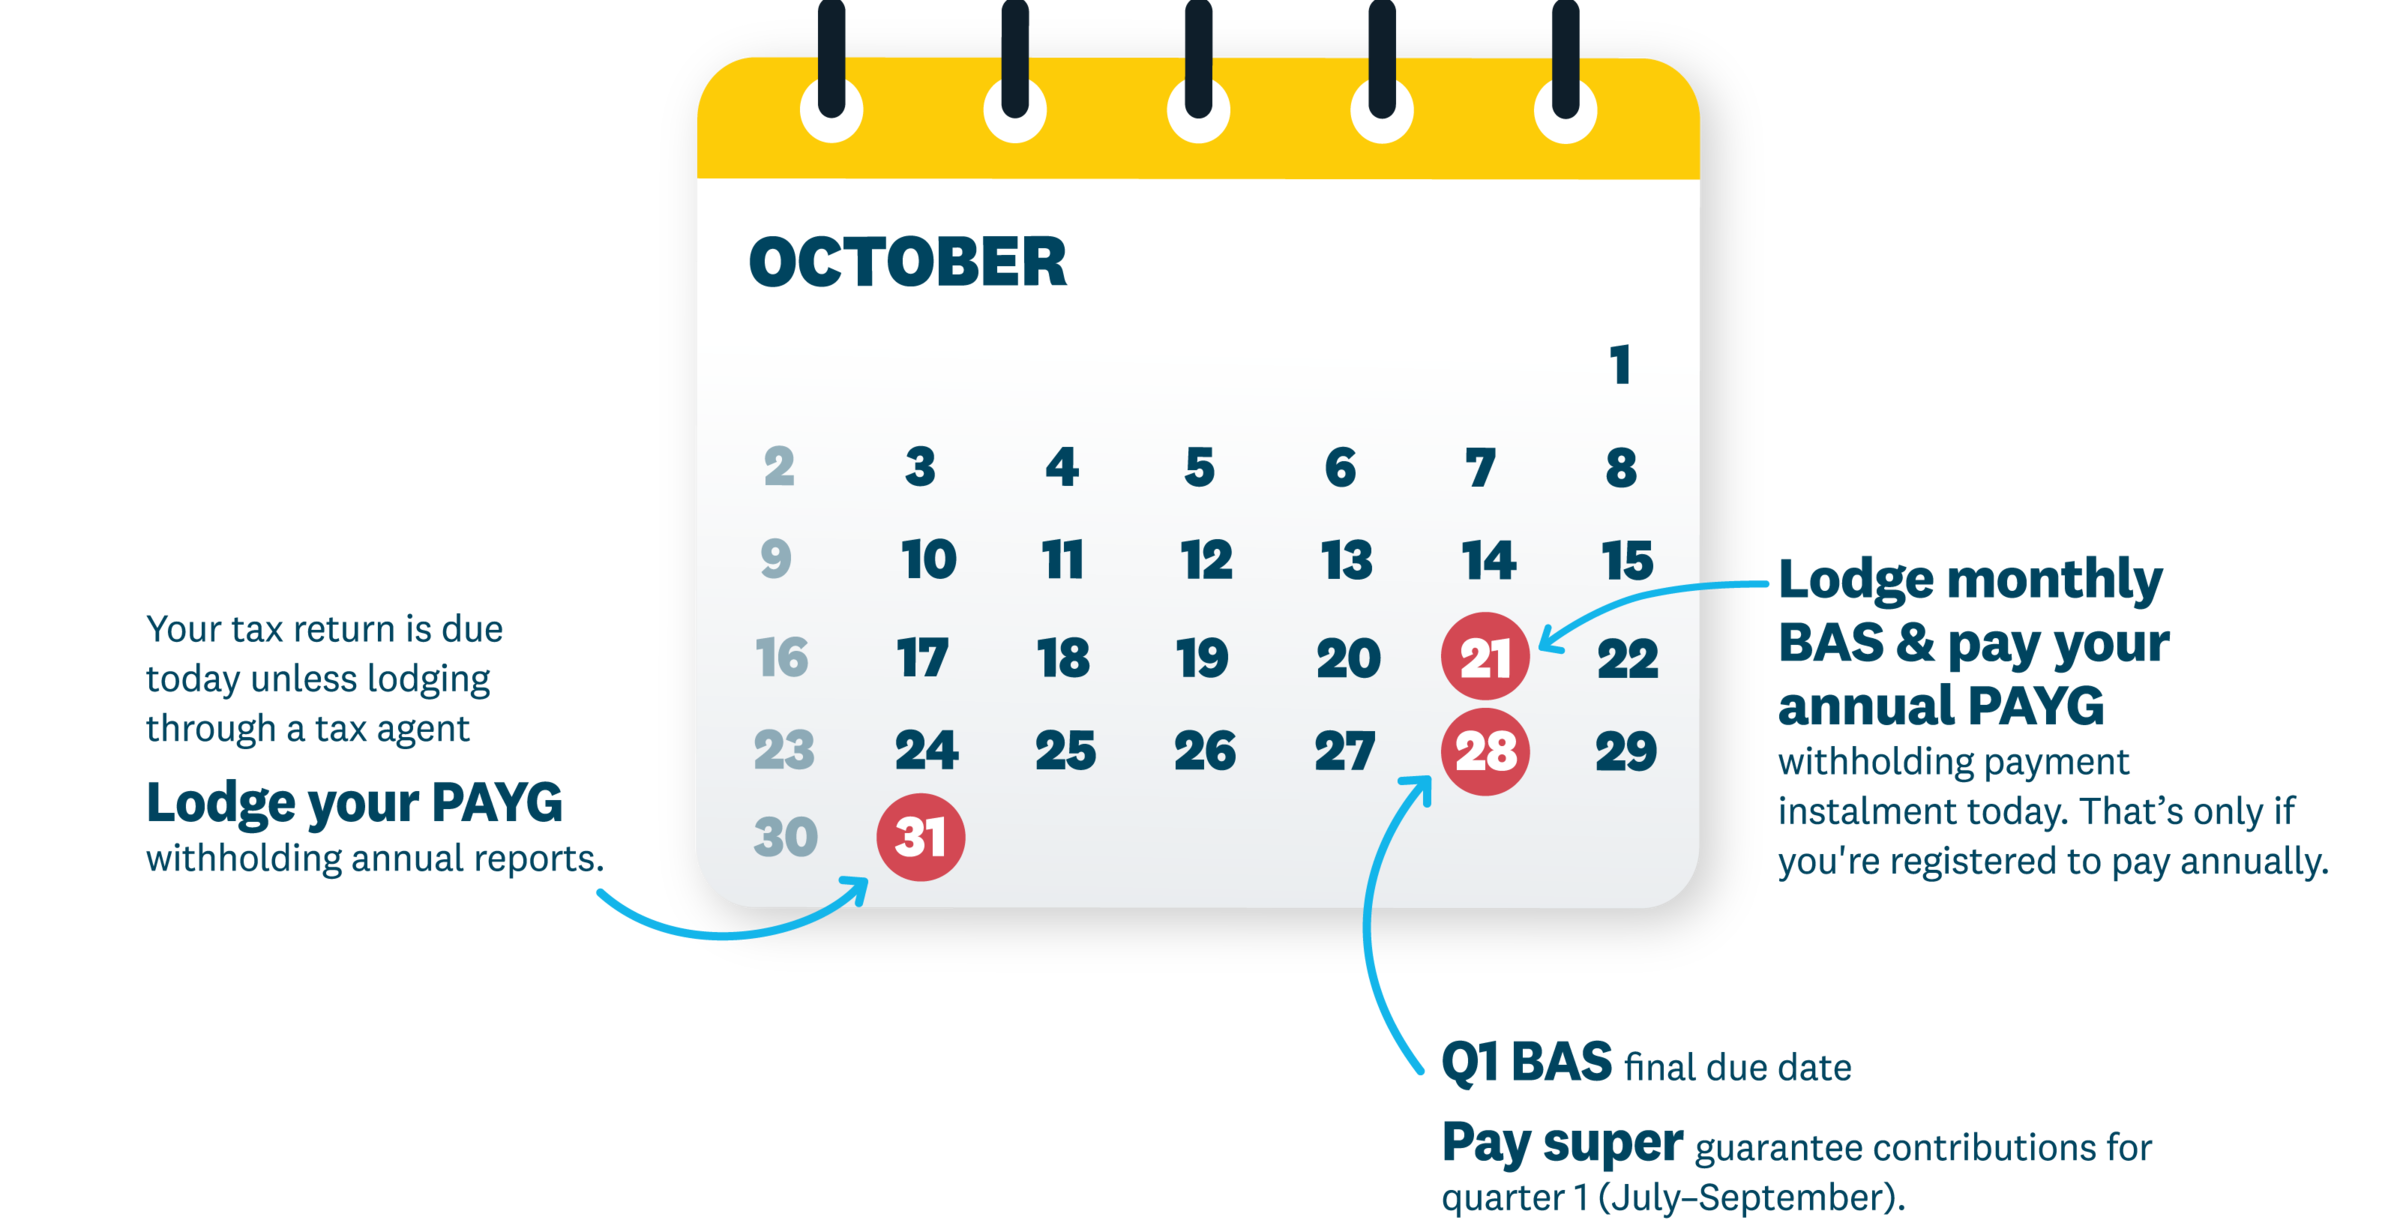 A calendar showing key dates in October. An overview is in the description below.